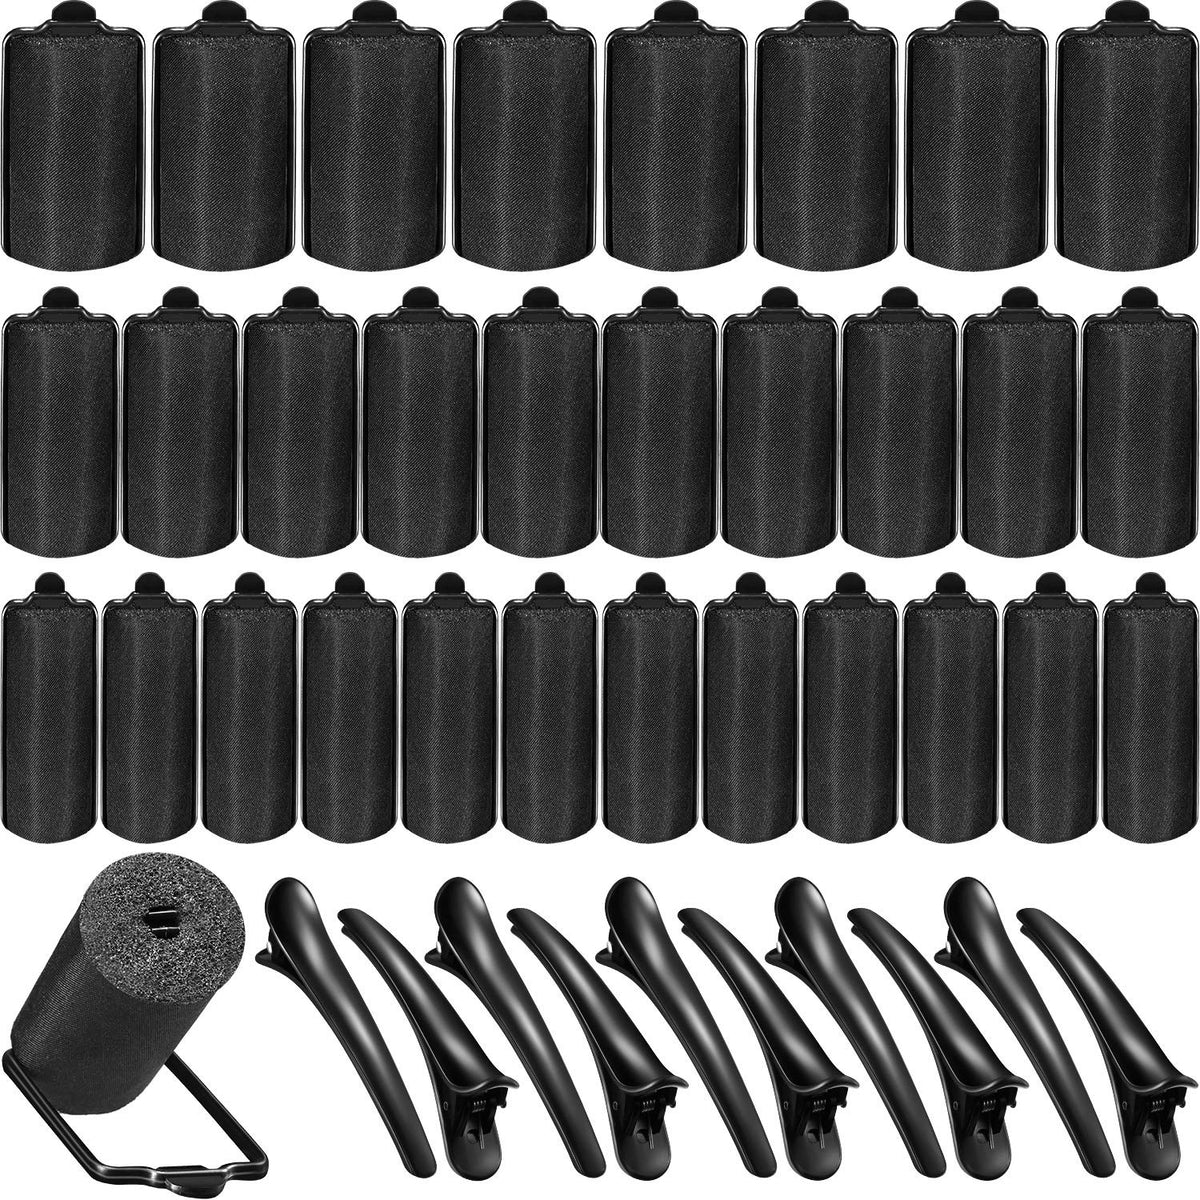 40 Pieces Sponge Hair Rollers Satin Rollers for Black Hair, Silk Rollers Foam Hair Rollers Hair Curlers with Duck Teeth Hair Clips for Hairdressing Styling (Black, Multi-Size)